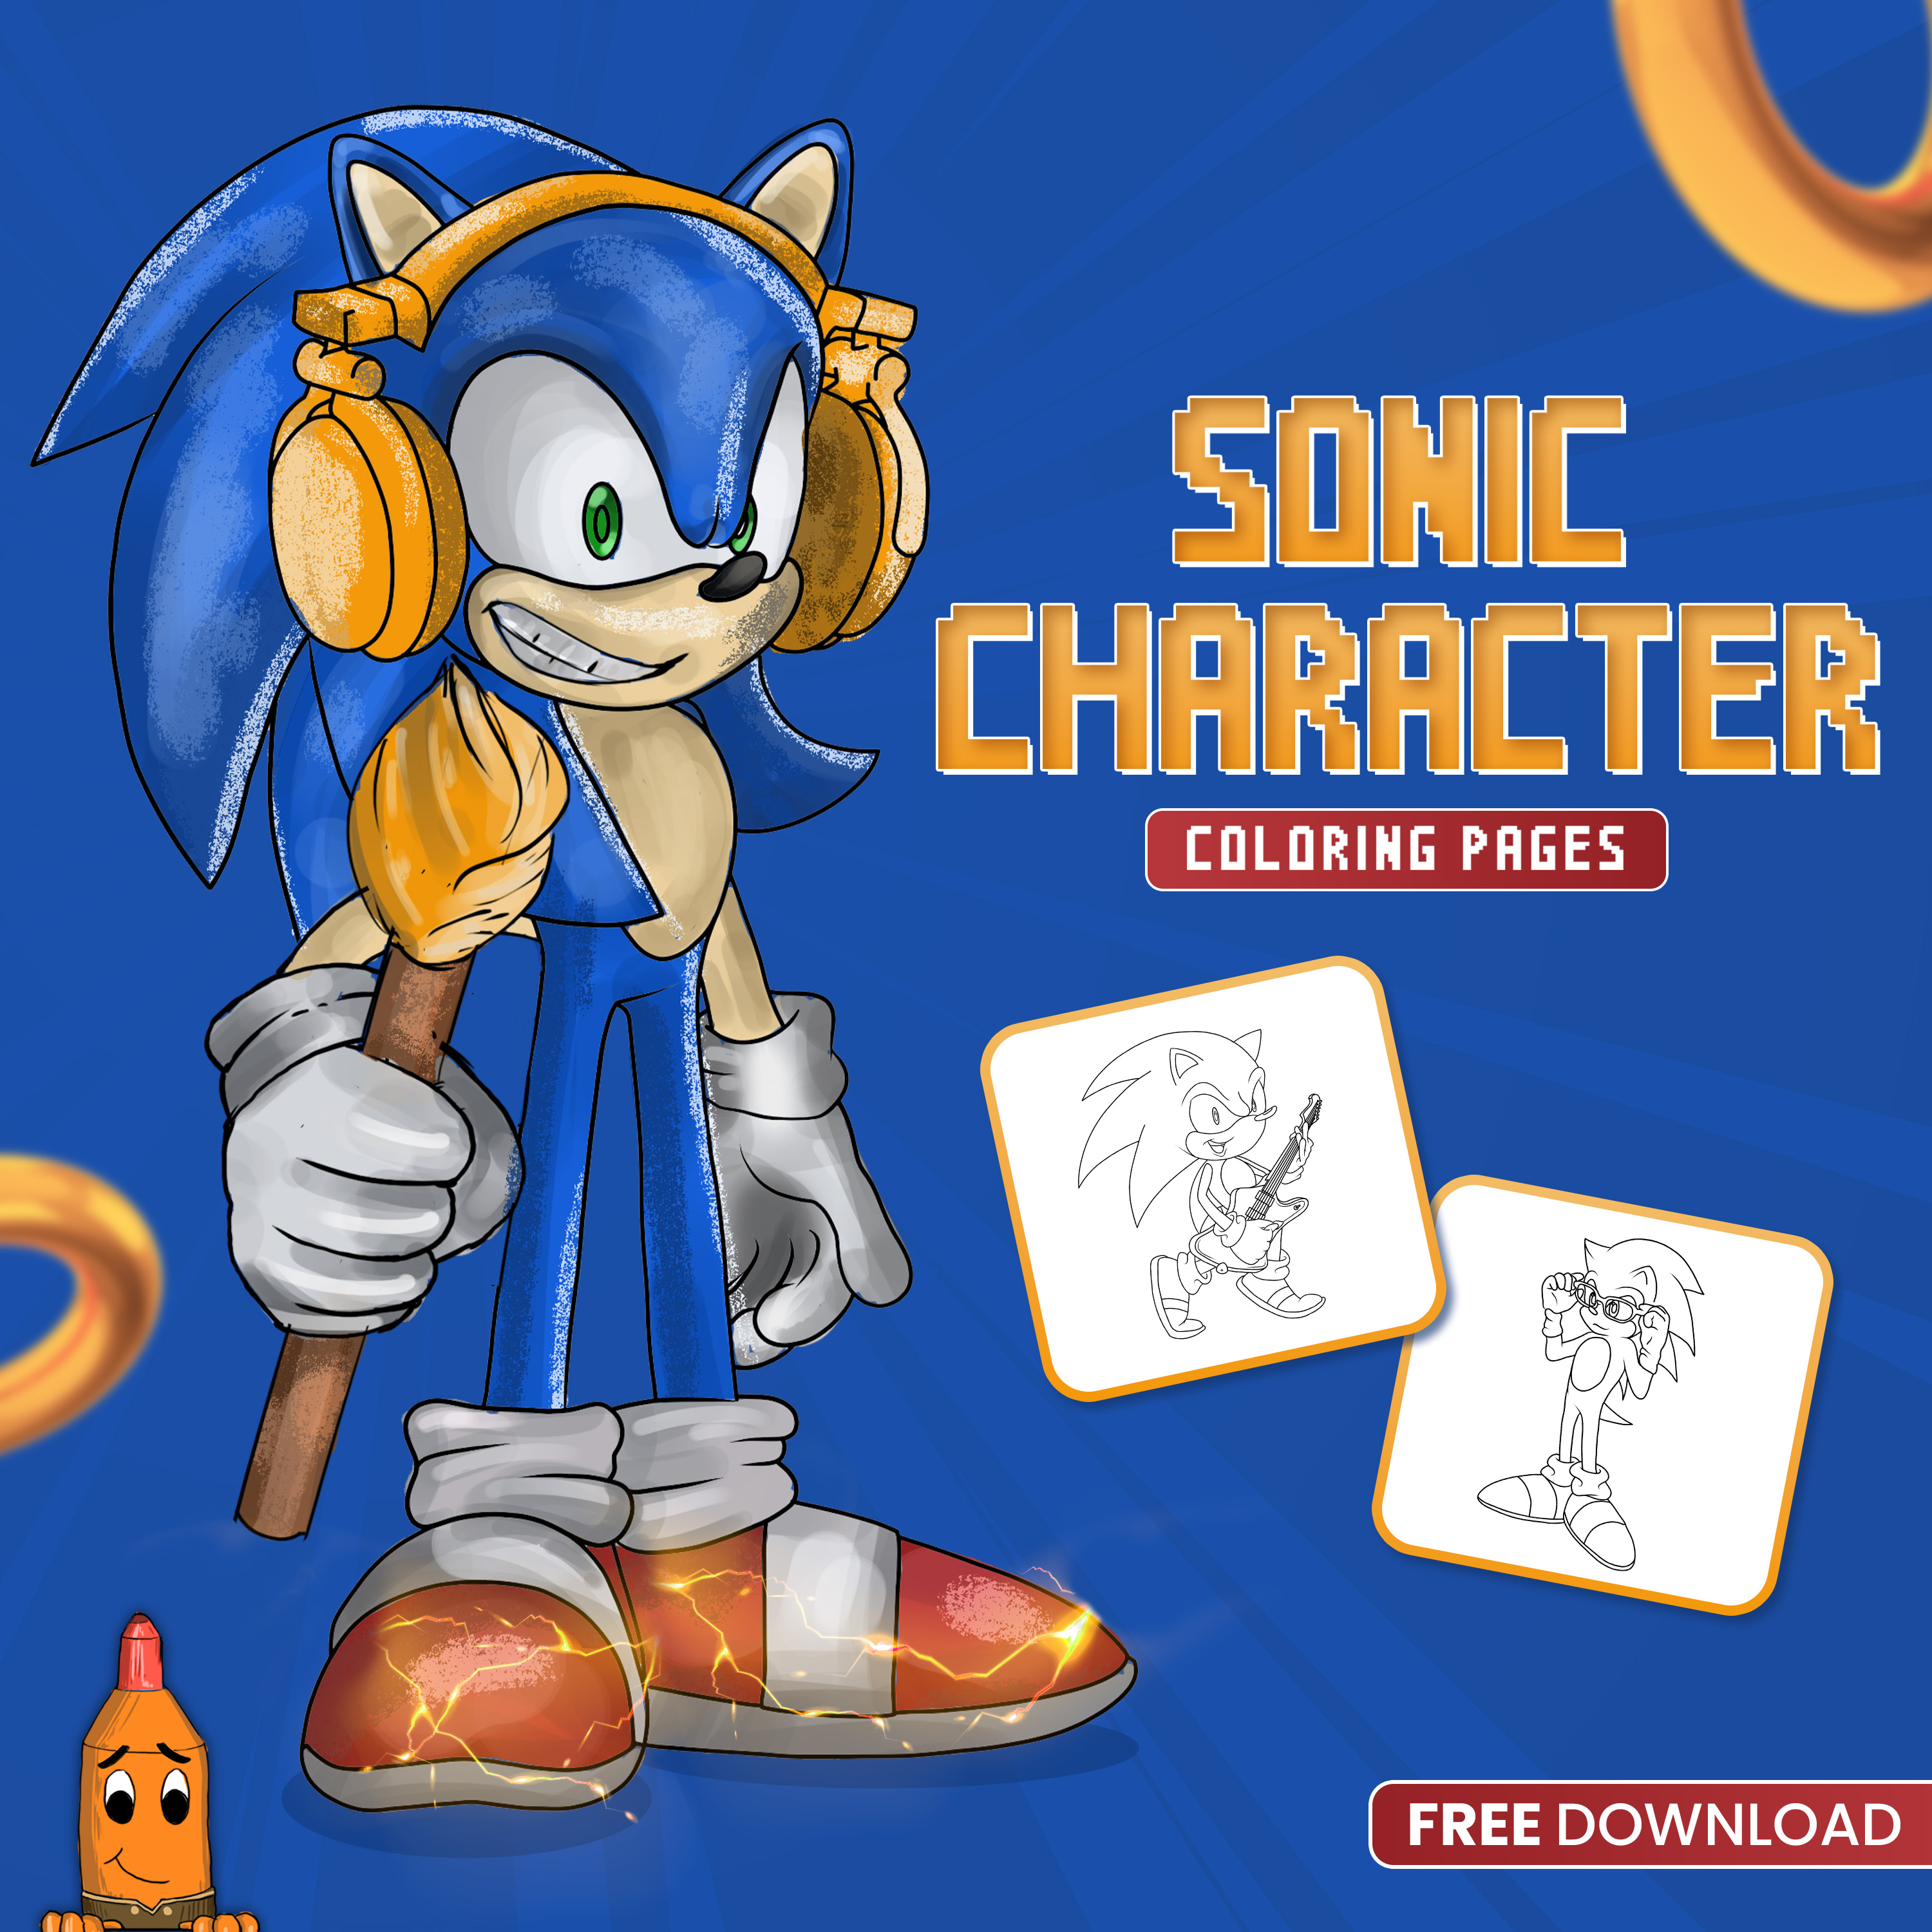 Sonic the hedgehog exclusive free coloring sheets